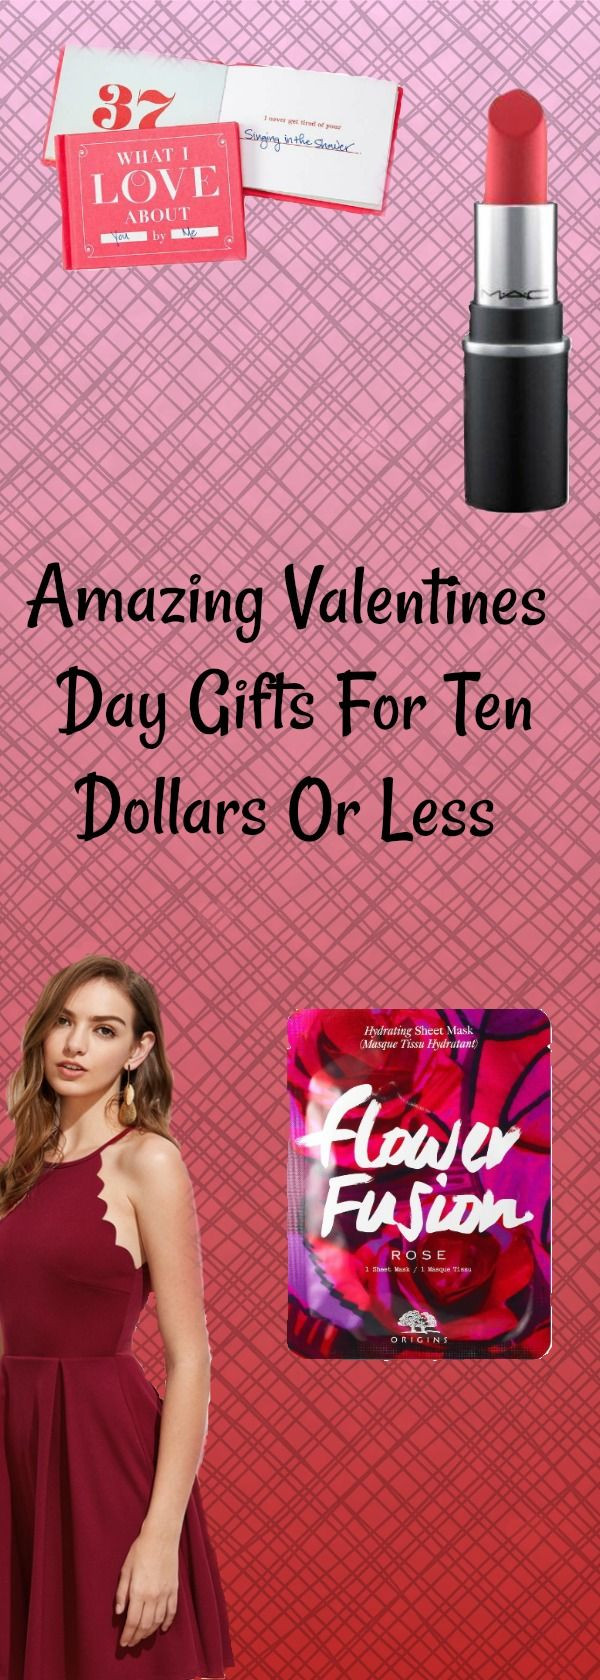 Gift Ideas For Valentines Day For Her
 Great Valentines Gifts For Her For $10 or less